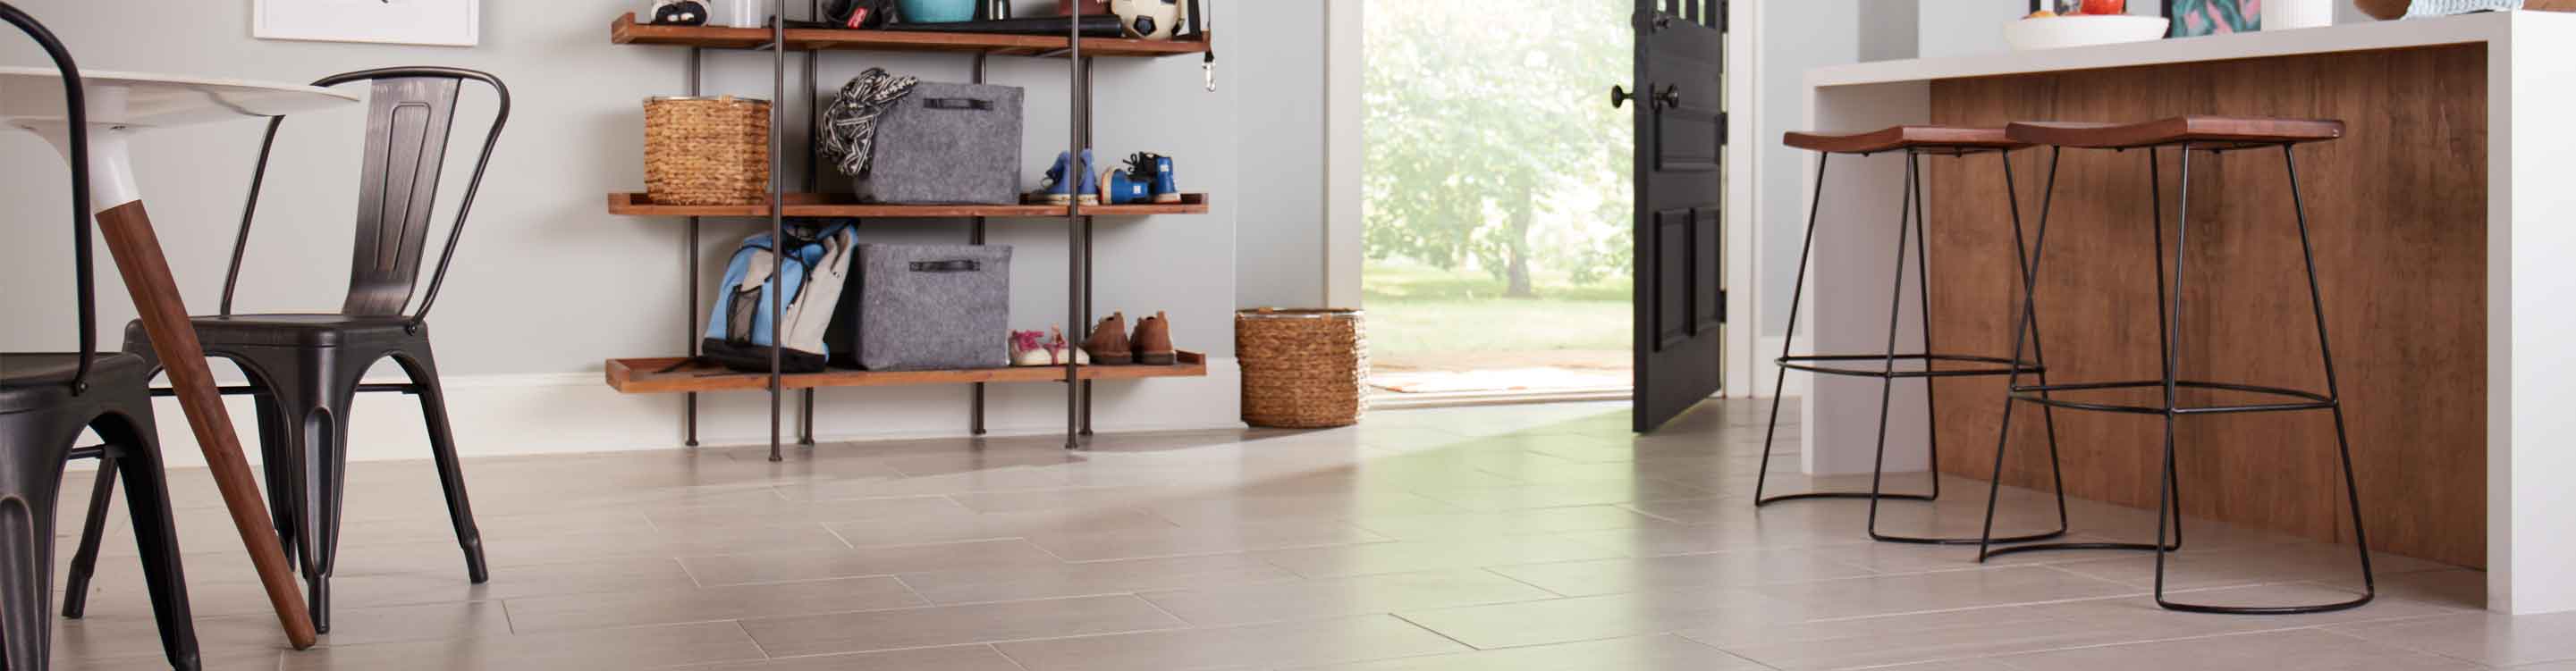 large-format wood look tile flooring in kitchen entryway